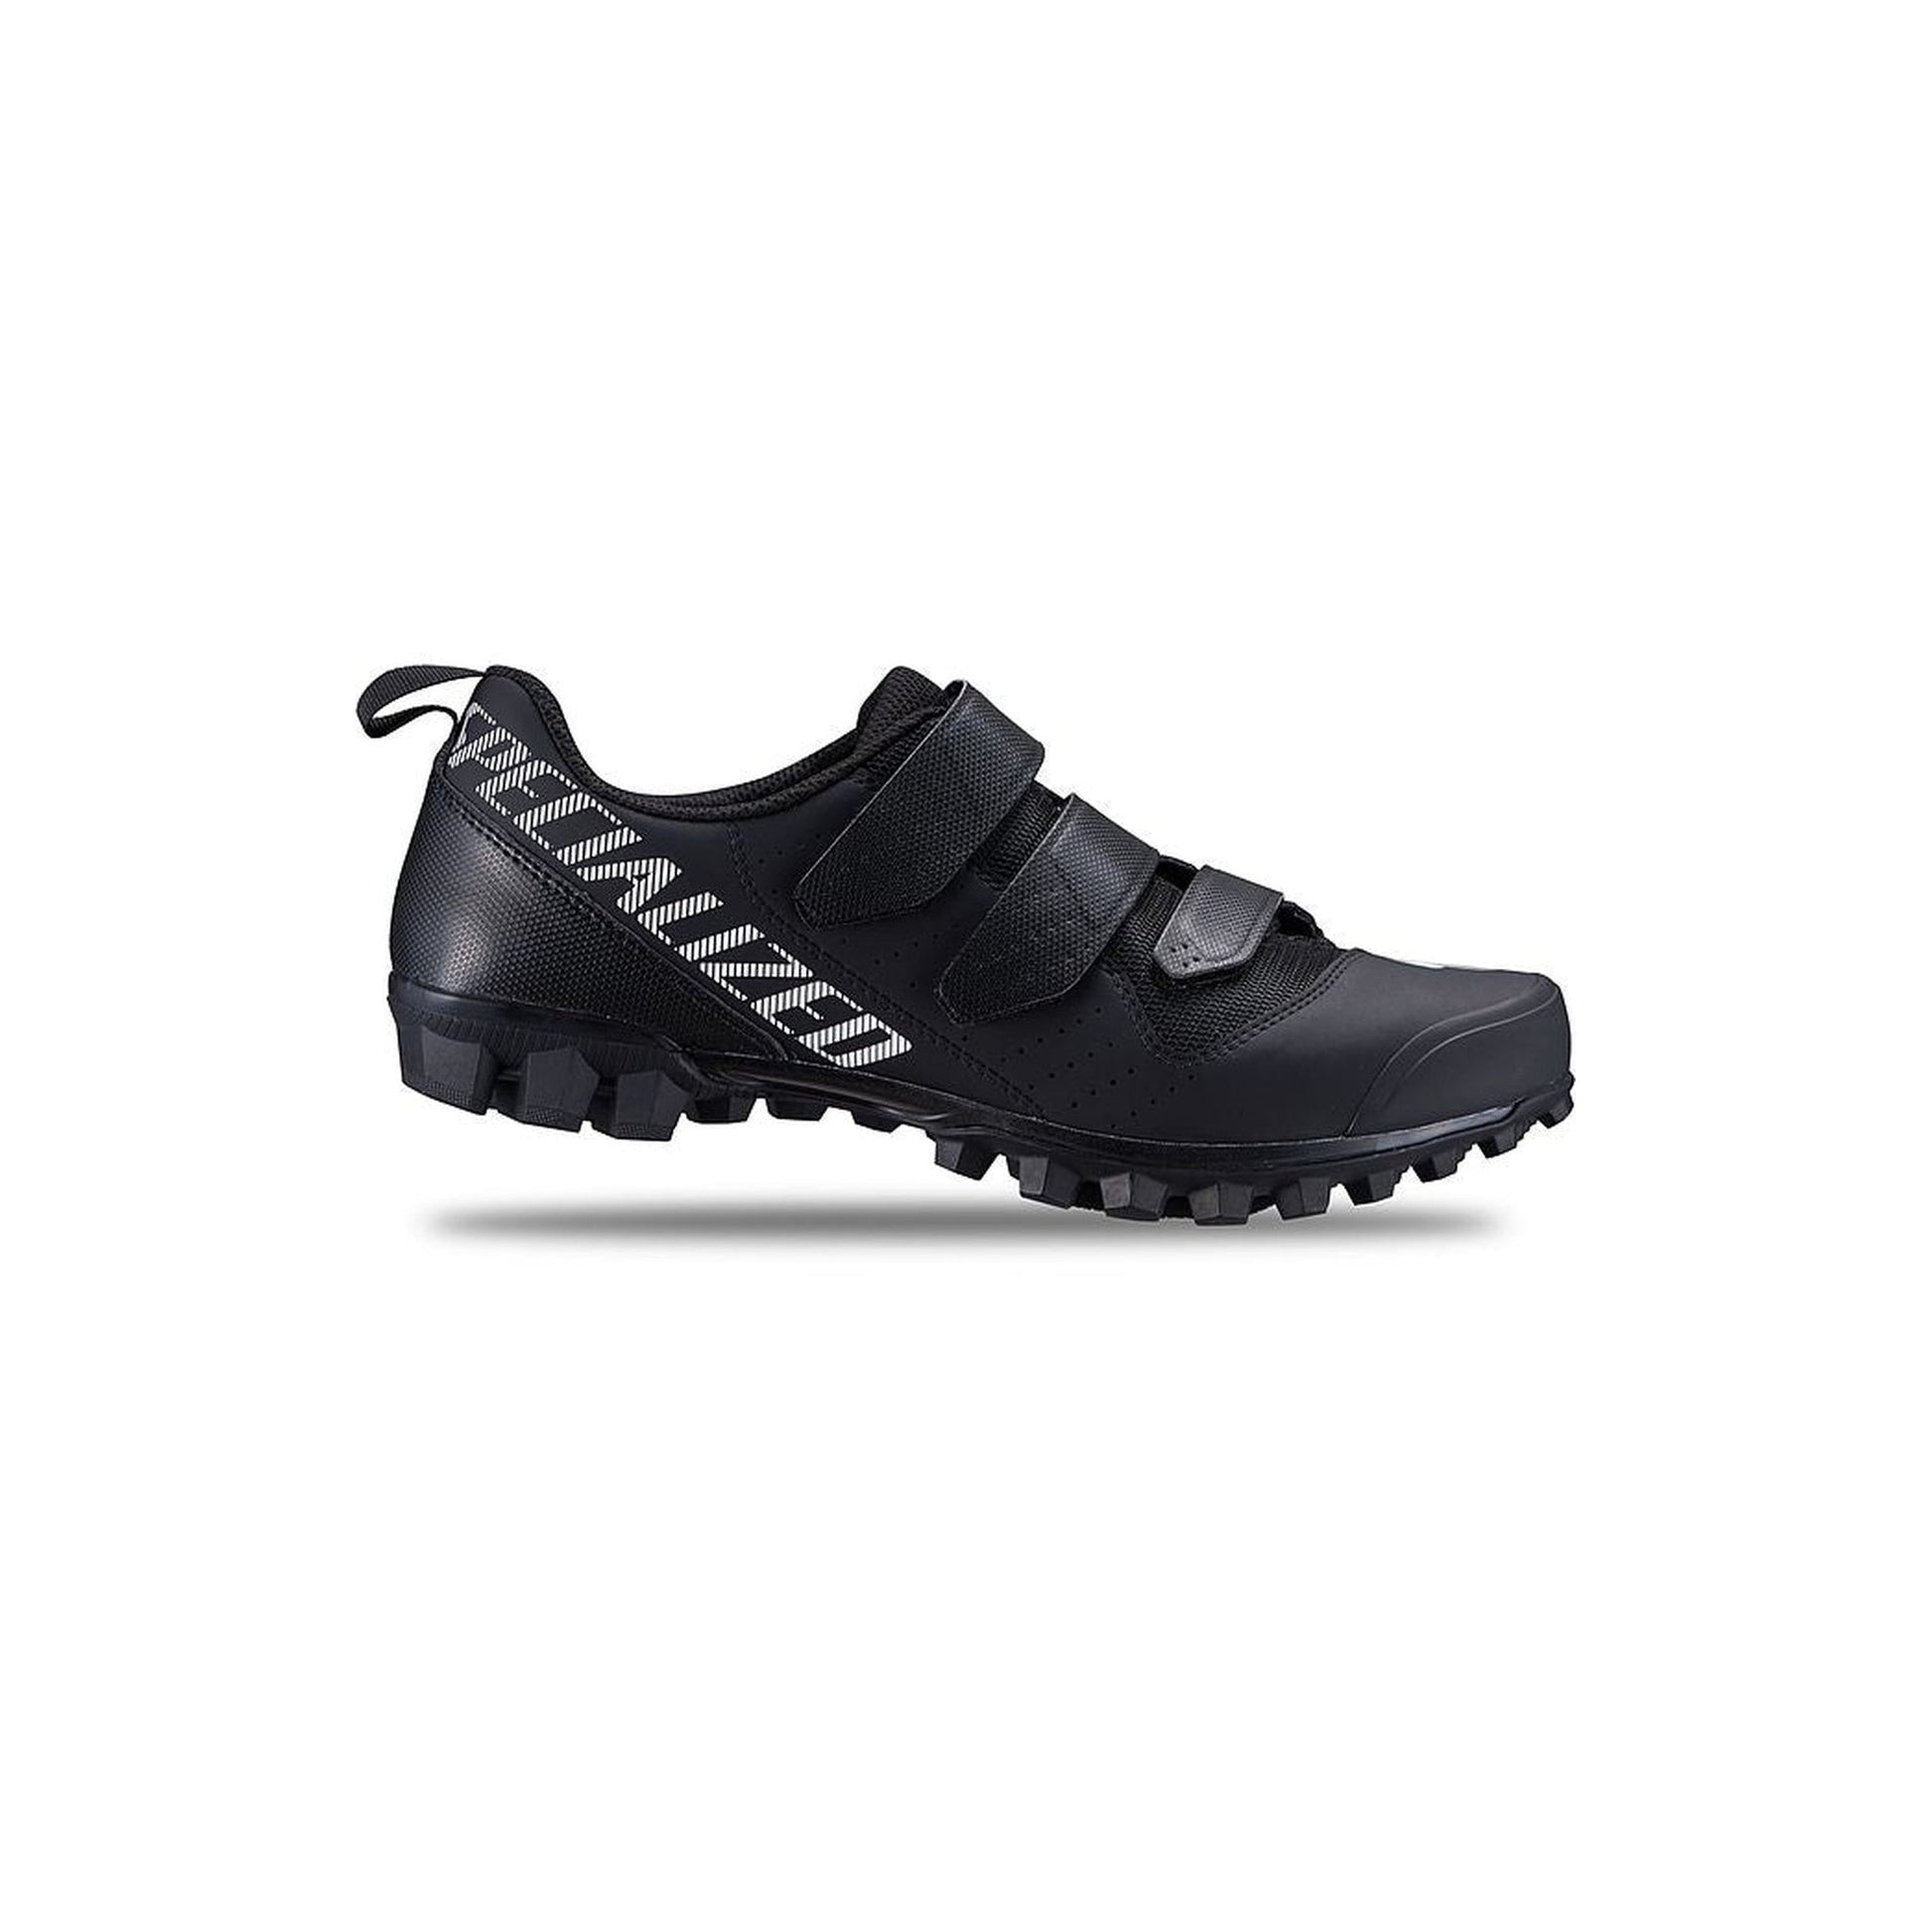 Recon 1.0 Mountain Bike Shoes-Cycles Direct Specialized